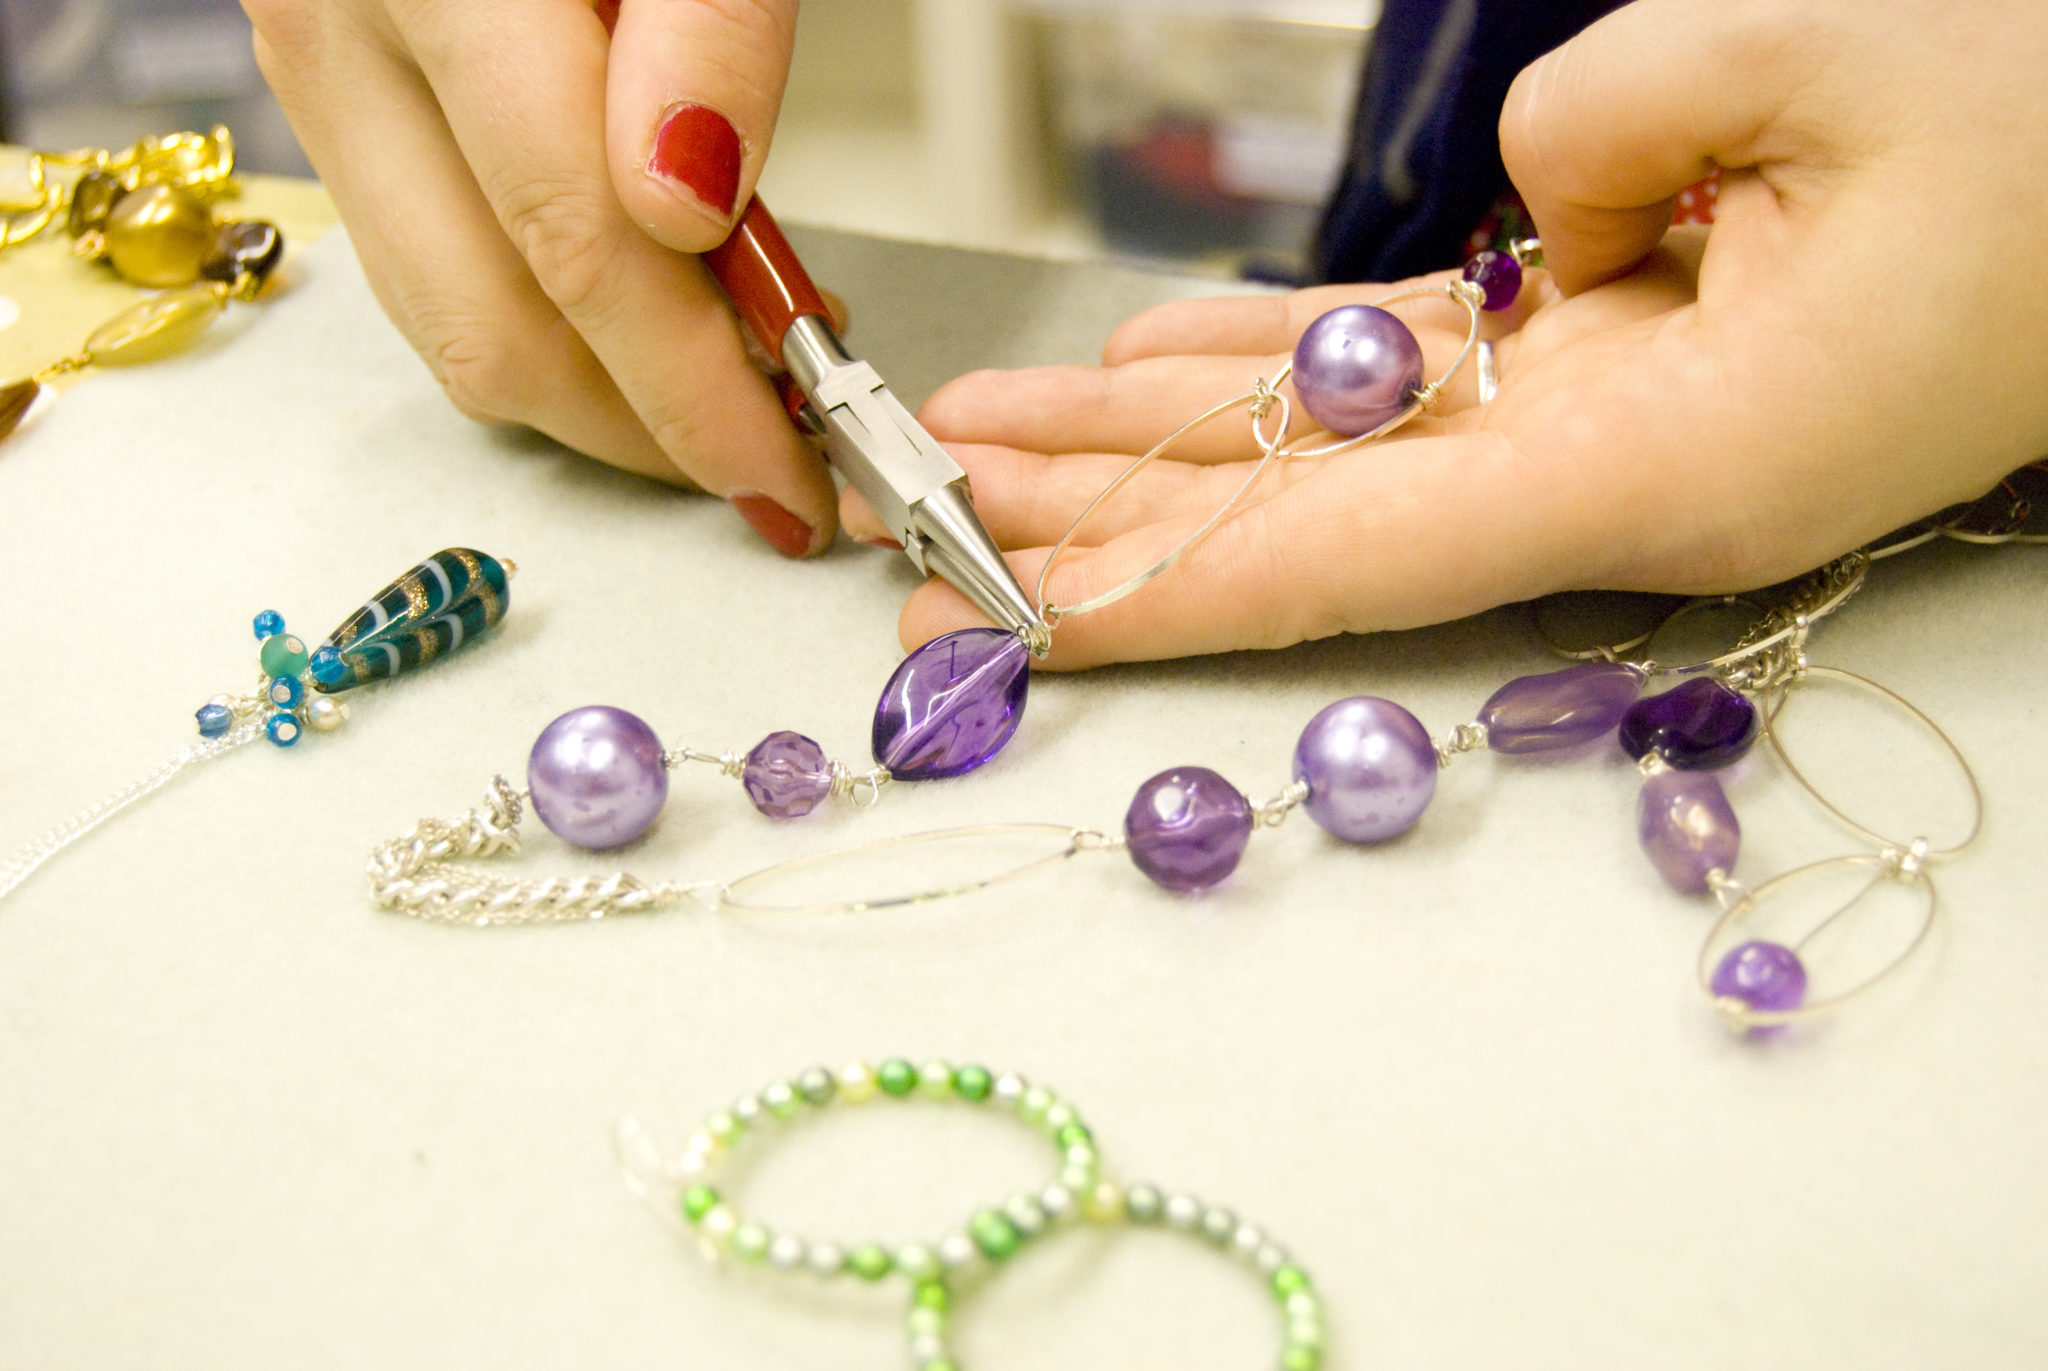 a-beginners-guide-to-jewellery-making-shall-inspire-you-to-make-your